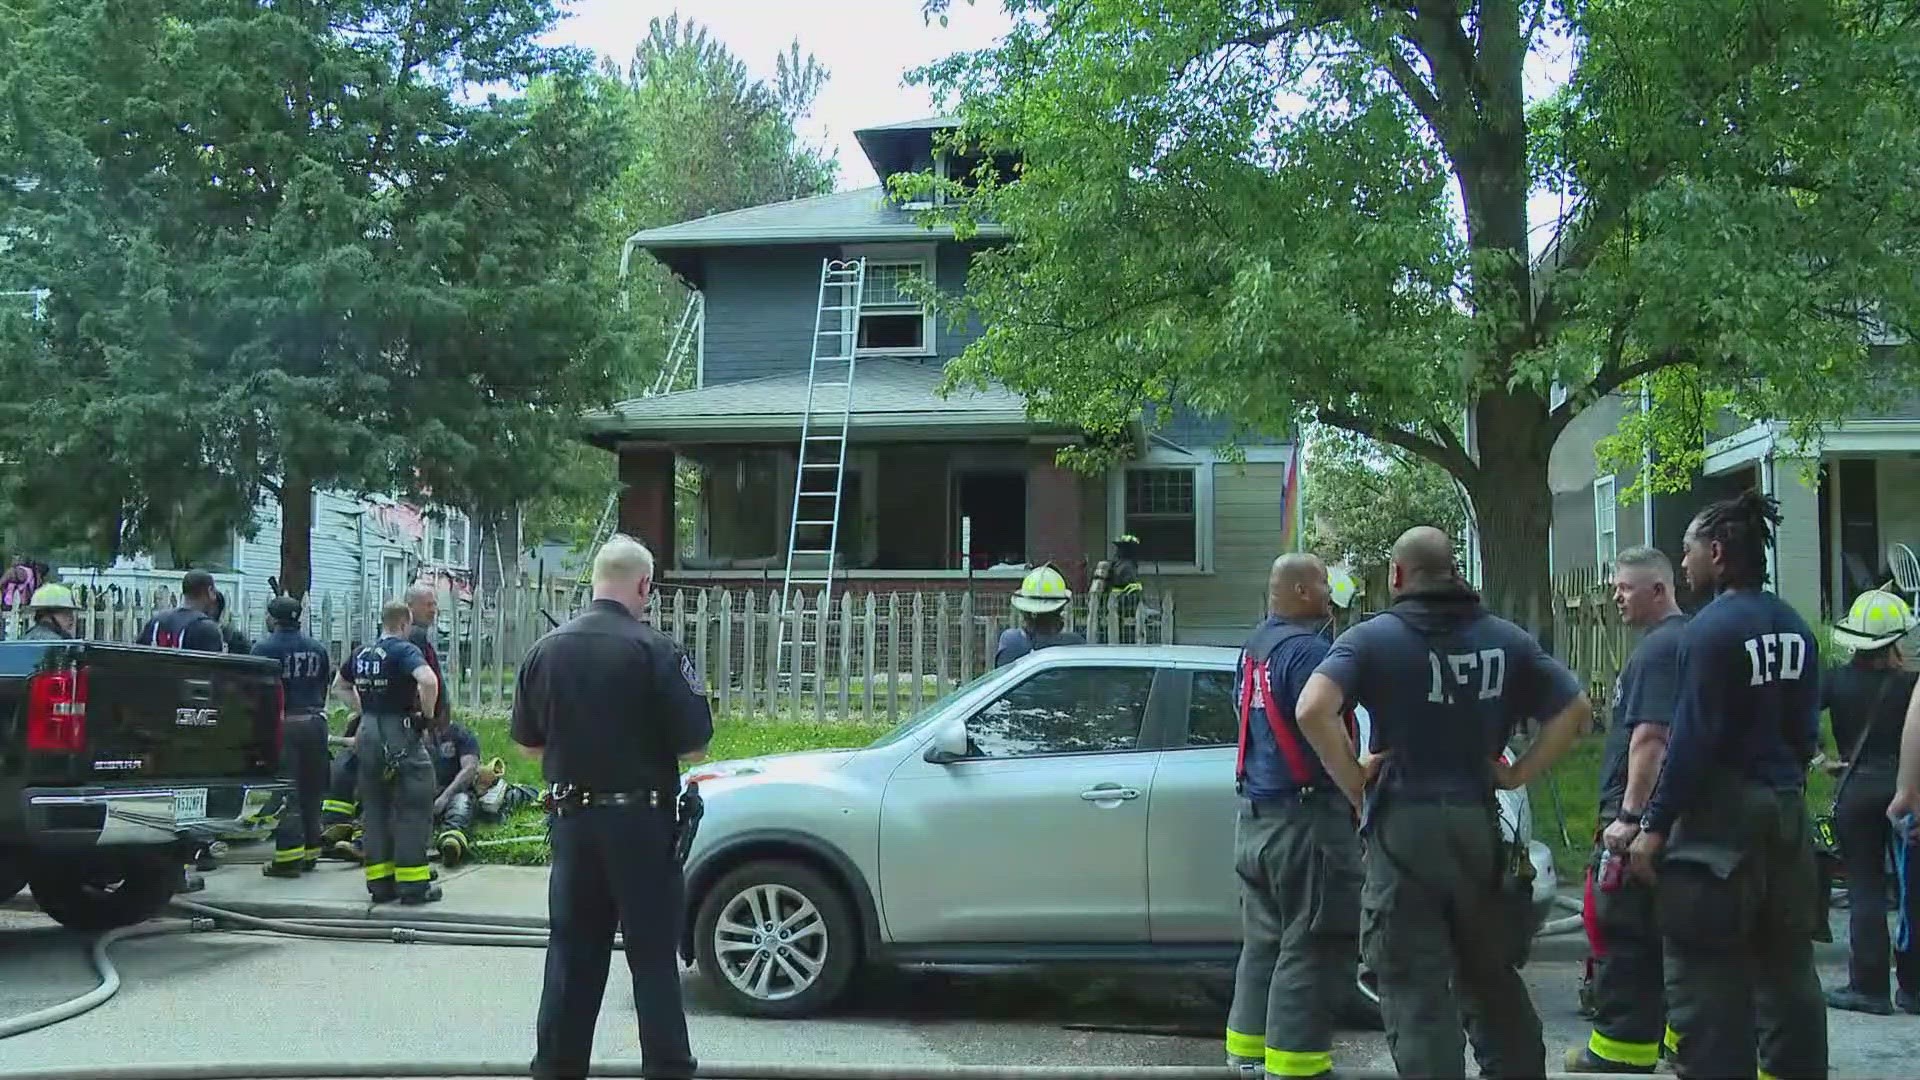 Crews are working to find out what caused a house fire in southern Broad Ripple.